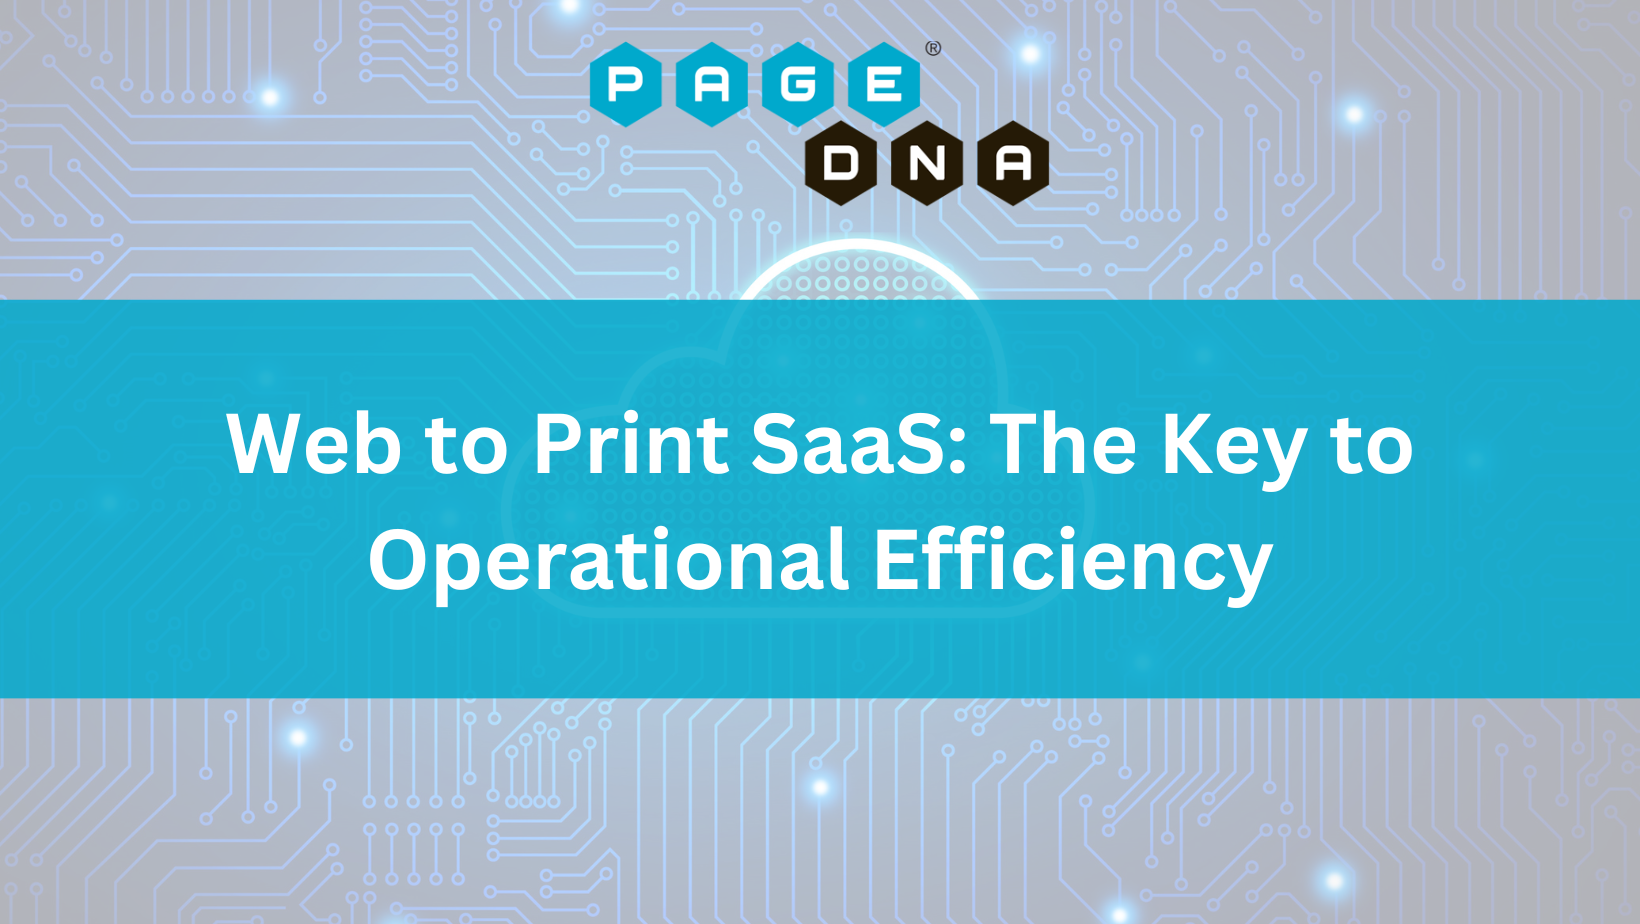 Web to Print SaaS: The Key to Operational Efficiency